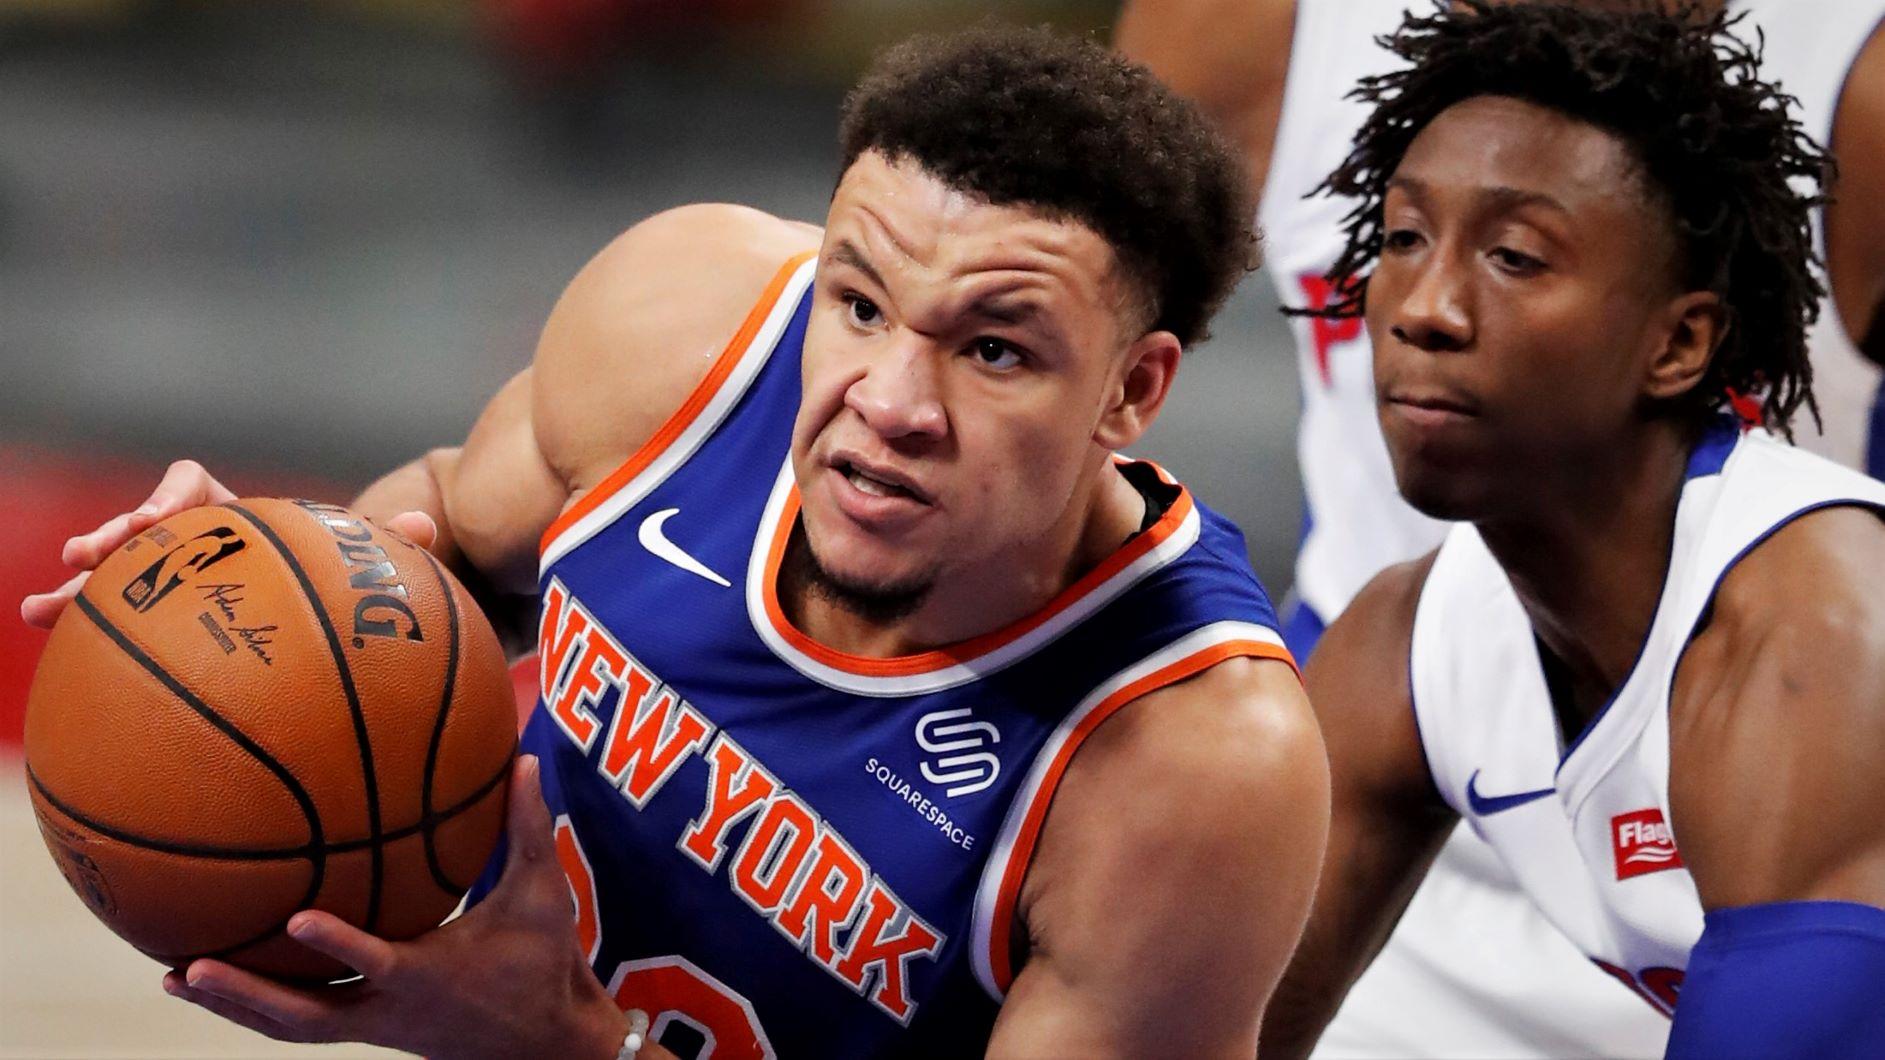 Dec 11, 2020; Detroit, Michigan, USA; New York Knicks forward Kevin Knox II (20) drives to the basket against Detroit Pistons guard Saben Lee (38) during the fourth quarter at Little Caesars Arena. Mandatory Credit: Raj Mehta-USA TODAY Sports / © Raj Mehta-USA TODAY Sports